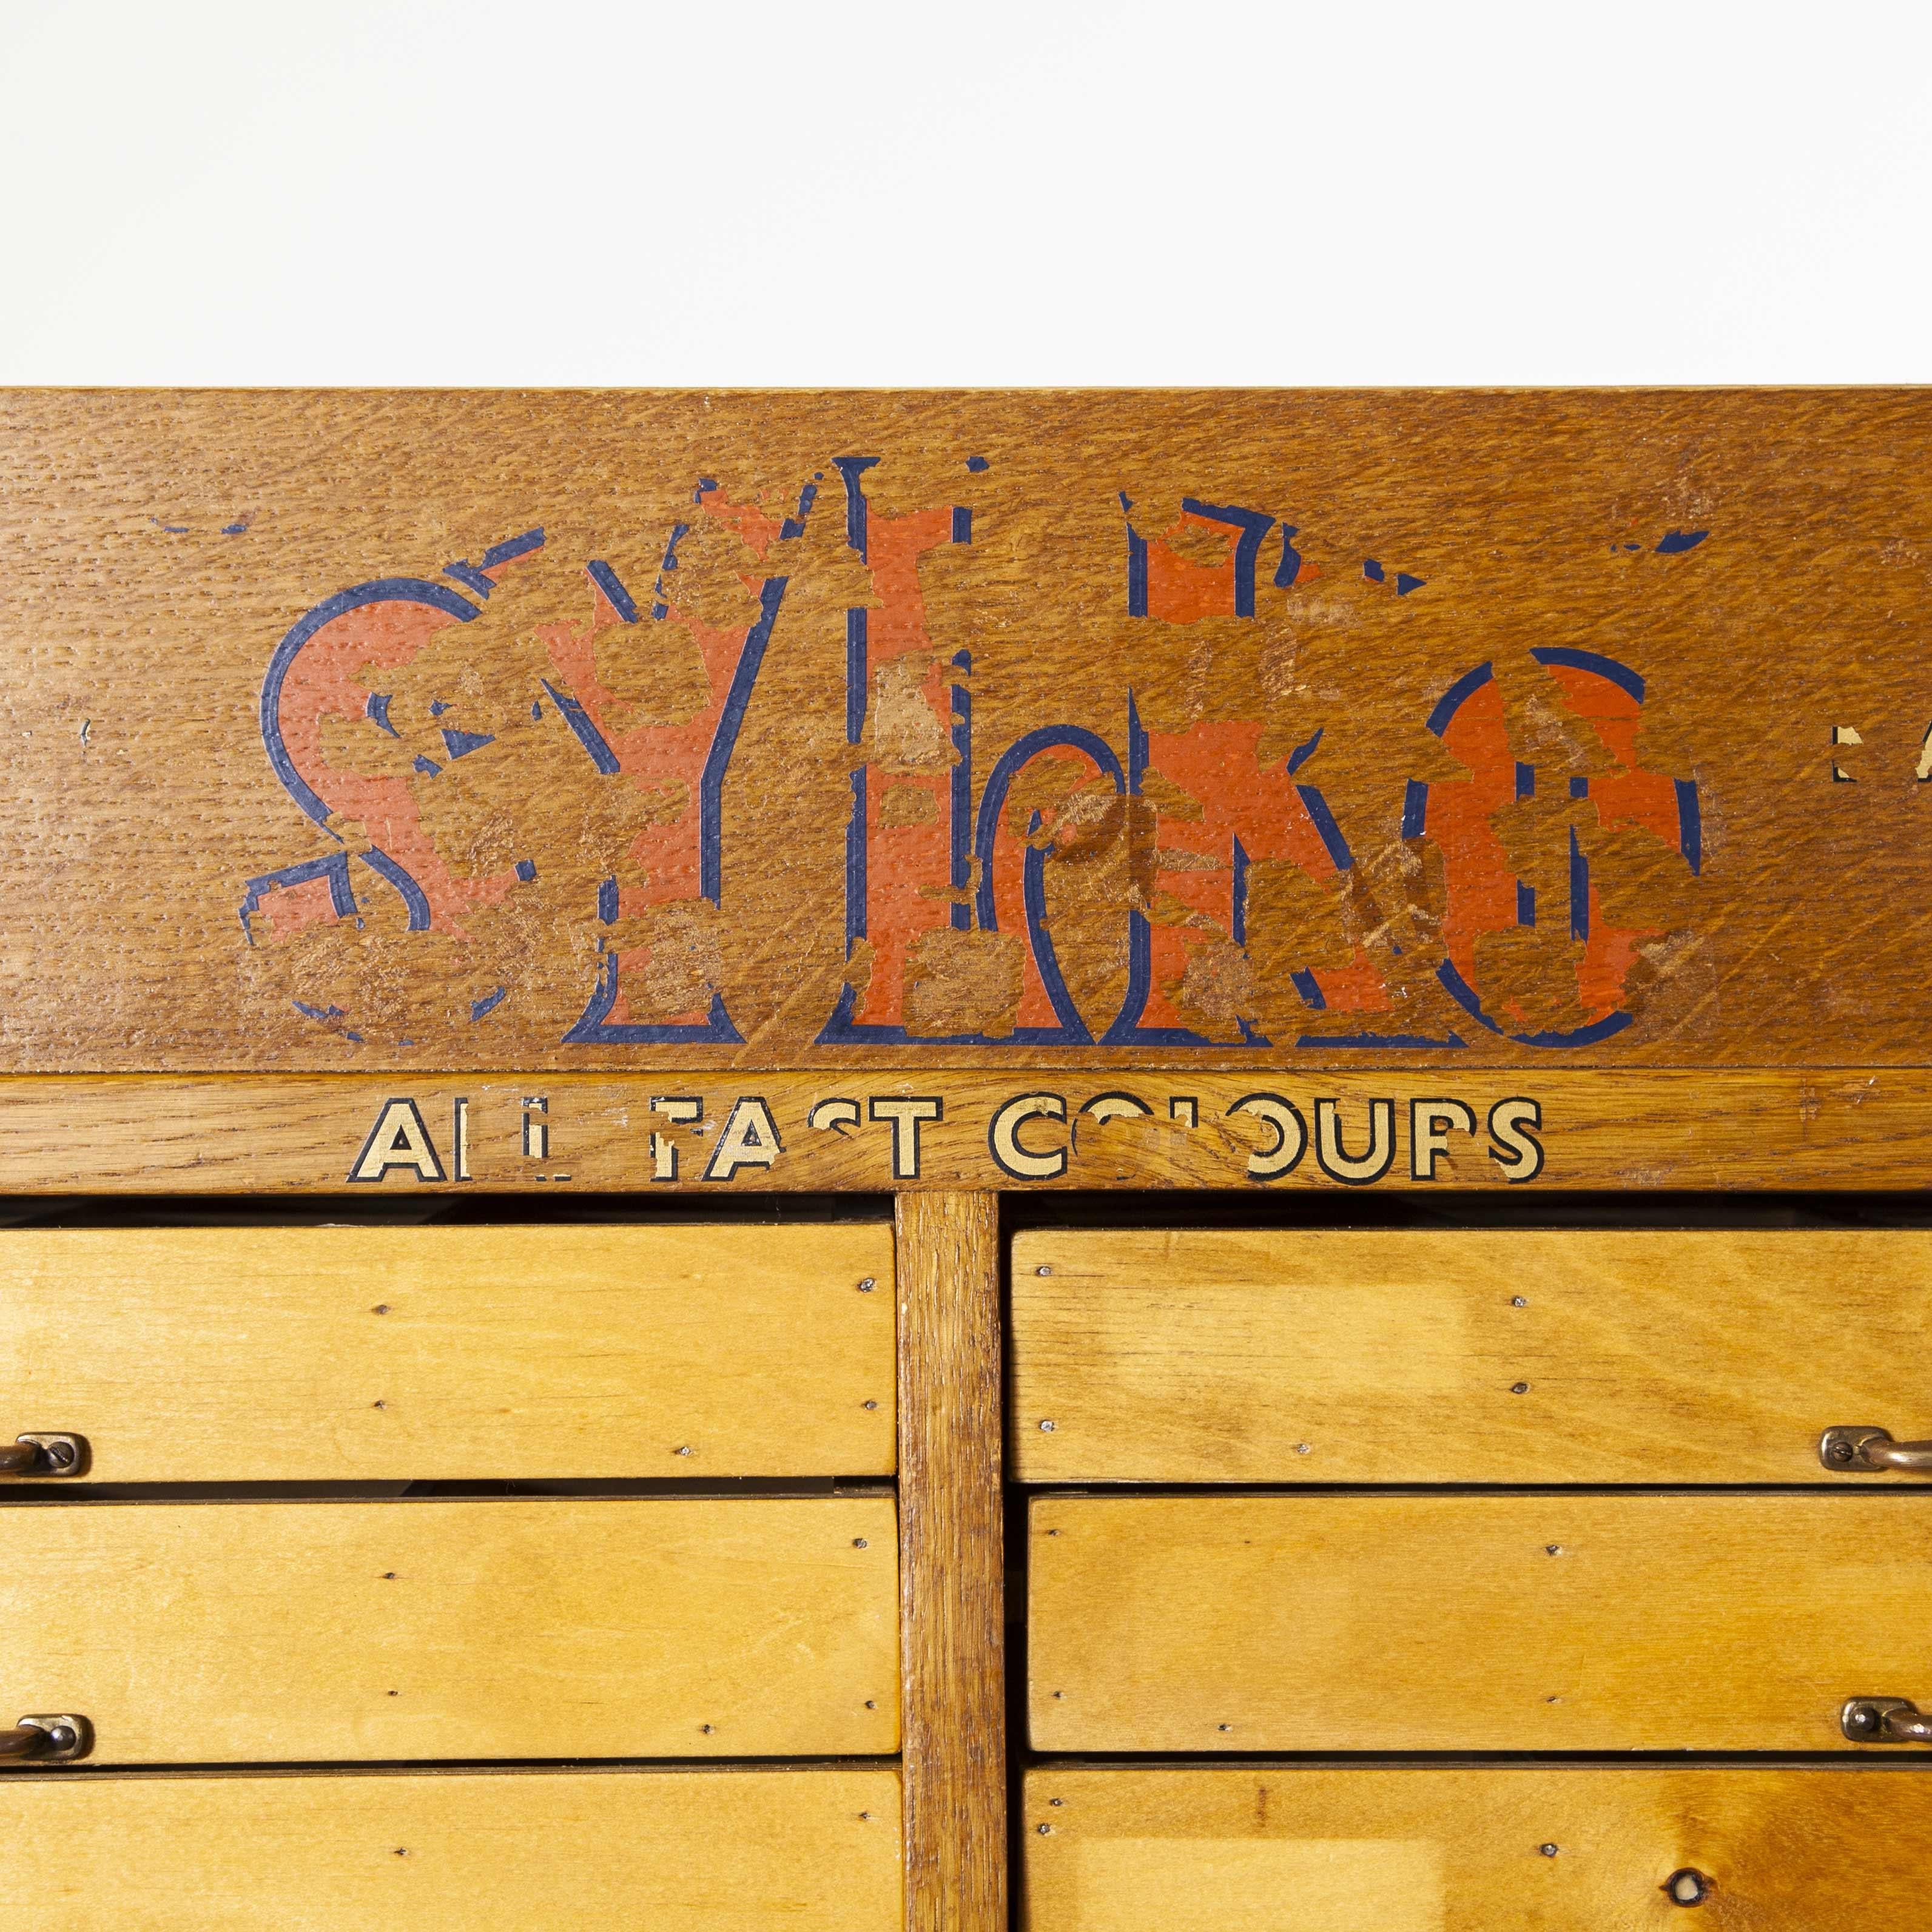 1950s birch fronted Sylko cotton haberdashery storage unit - fifty drawers. We recently salvaged a whole collection of original haberdashery shop cabinets from the original haberdashers in the north of England. Totally original and in exceptional